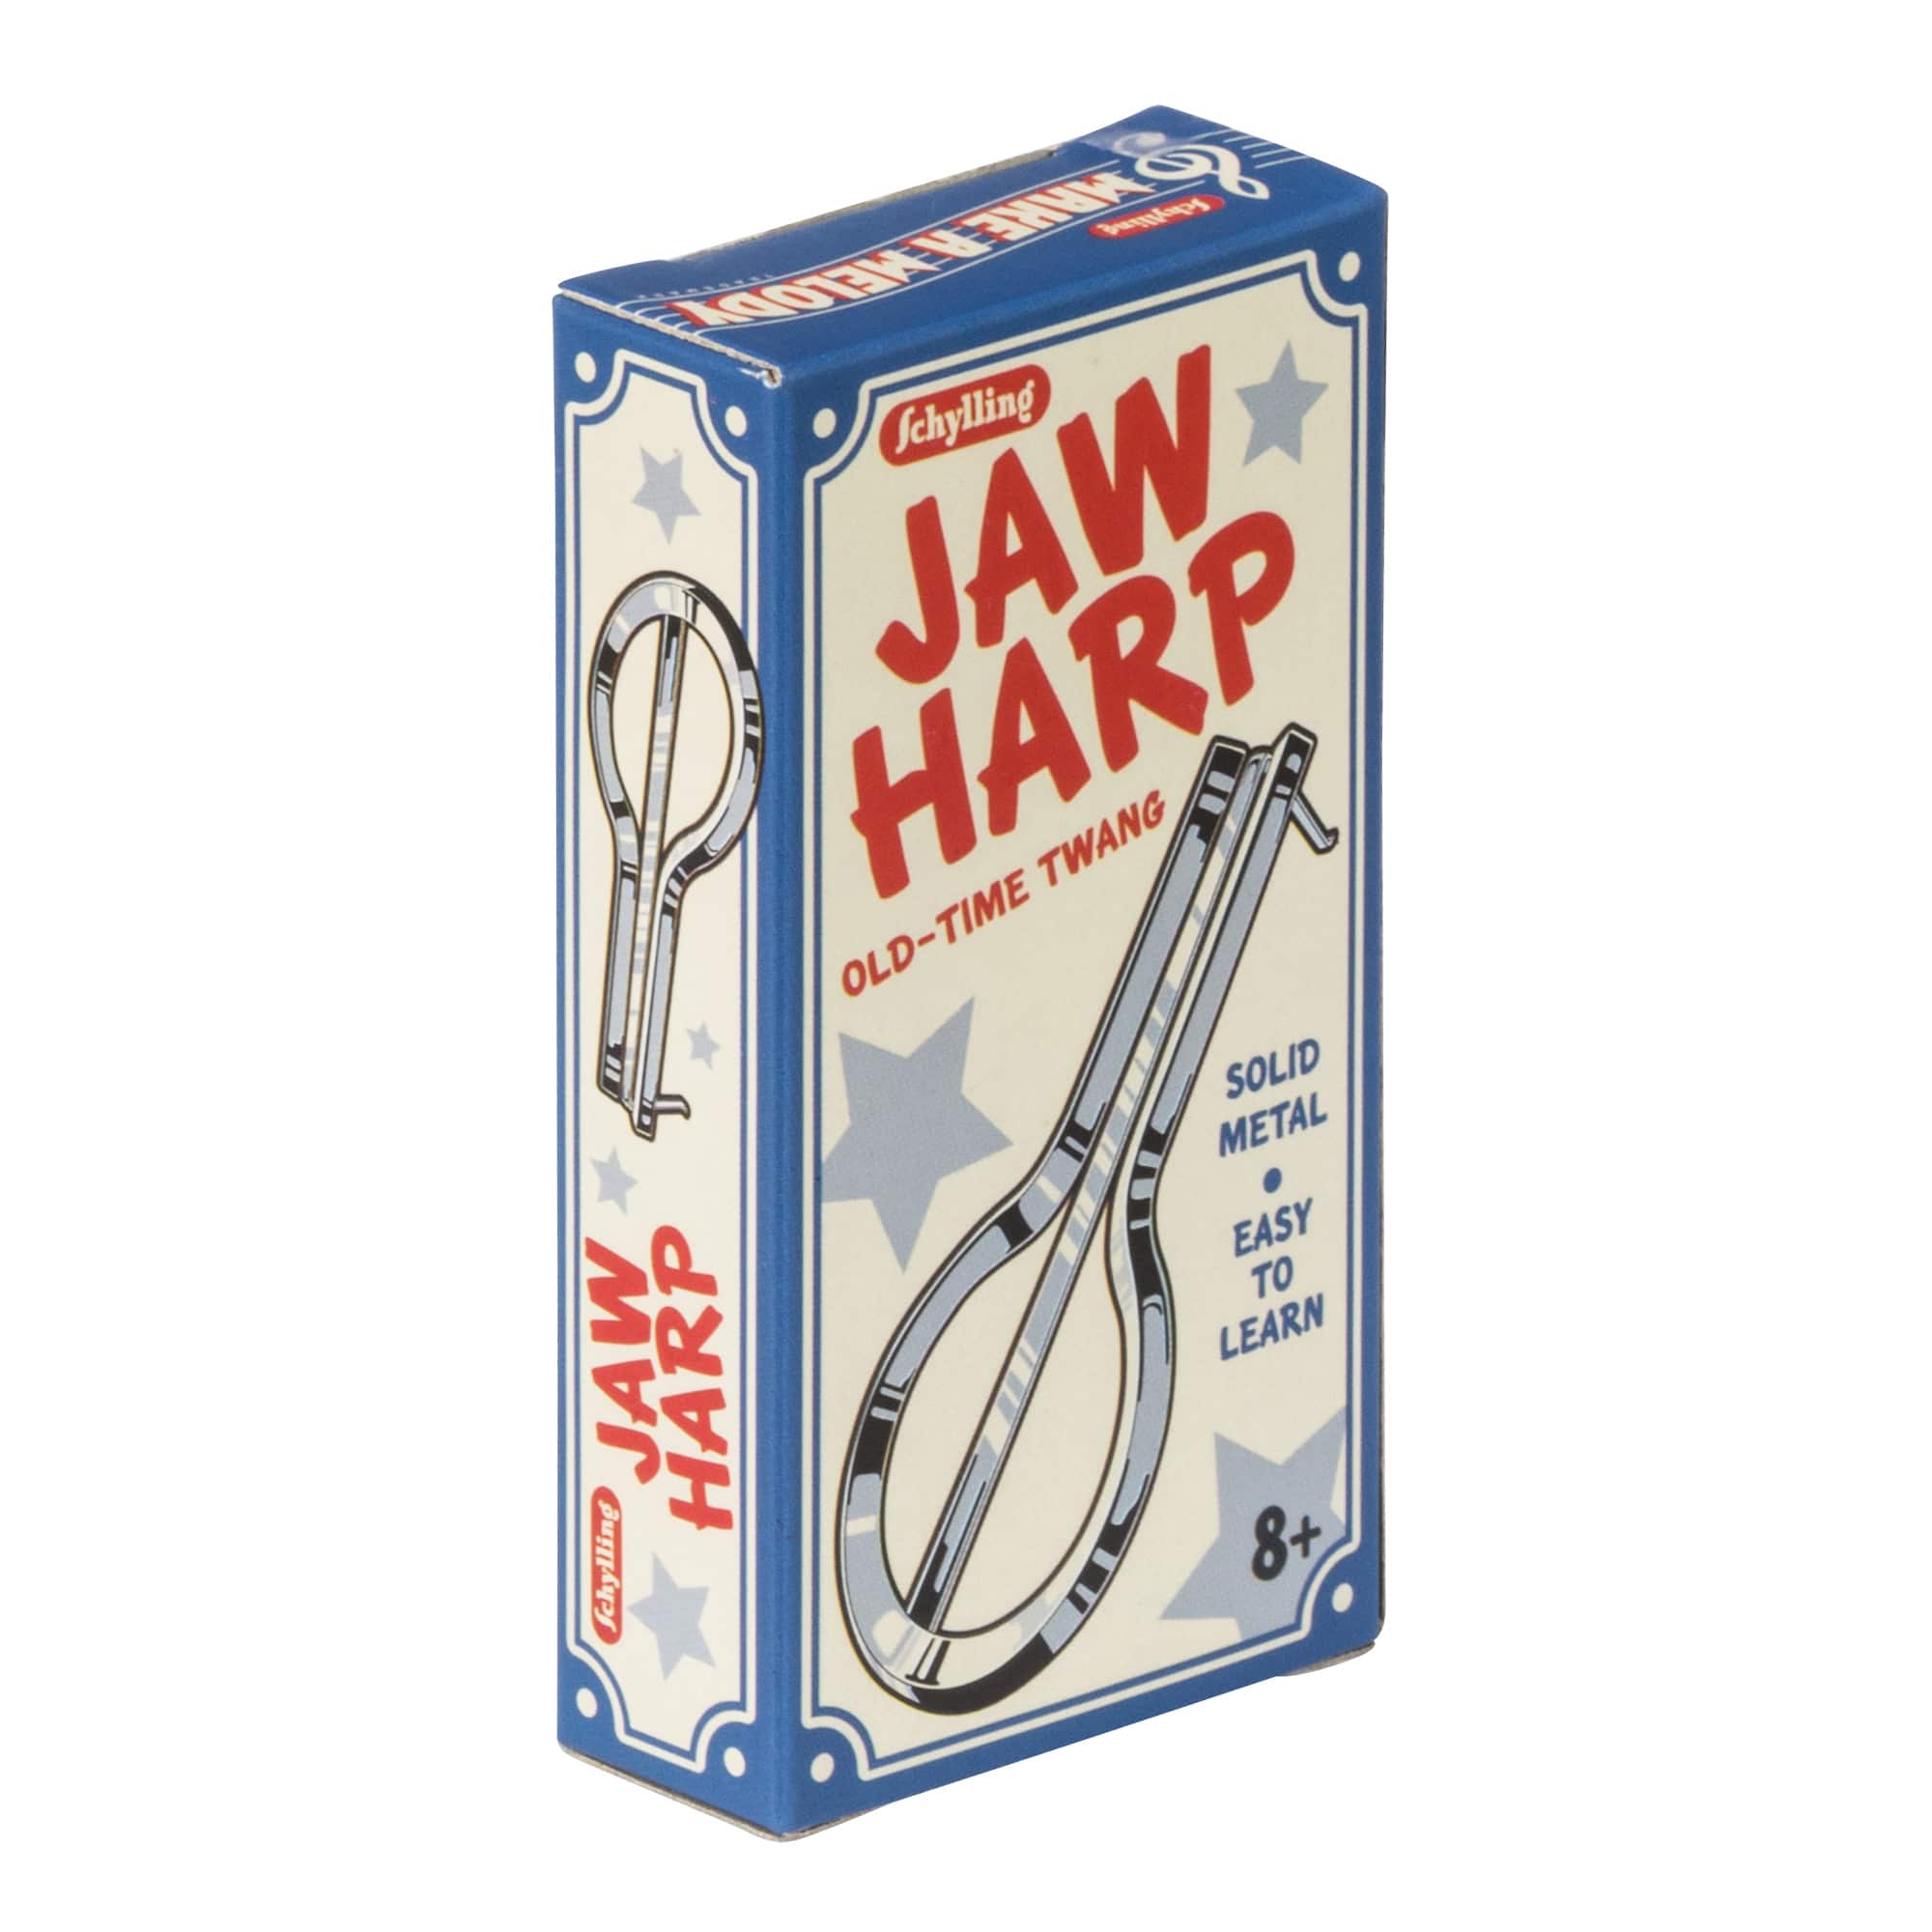 Front view of Jaw Harp in package.